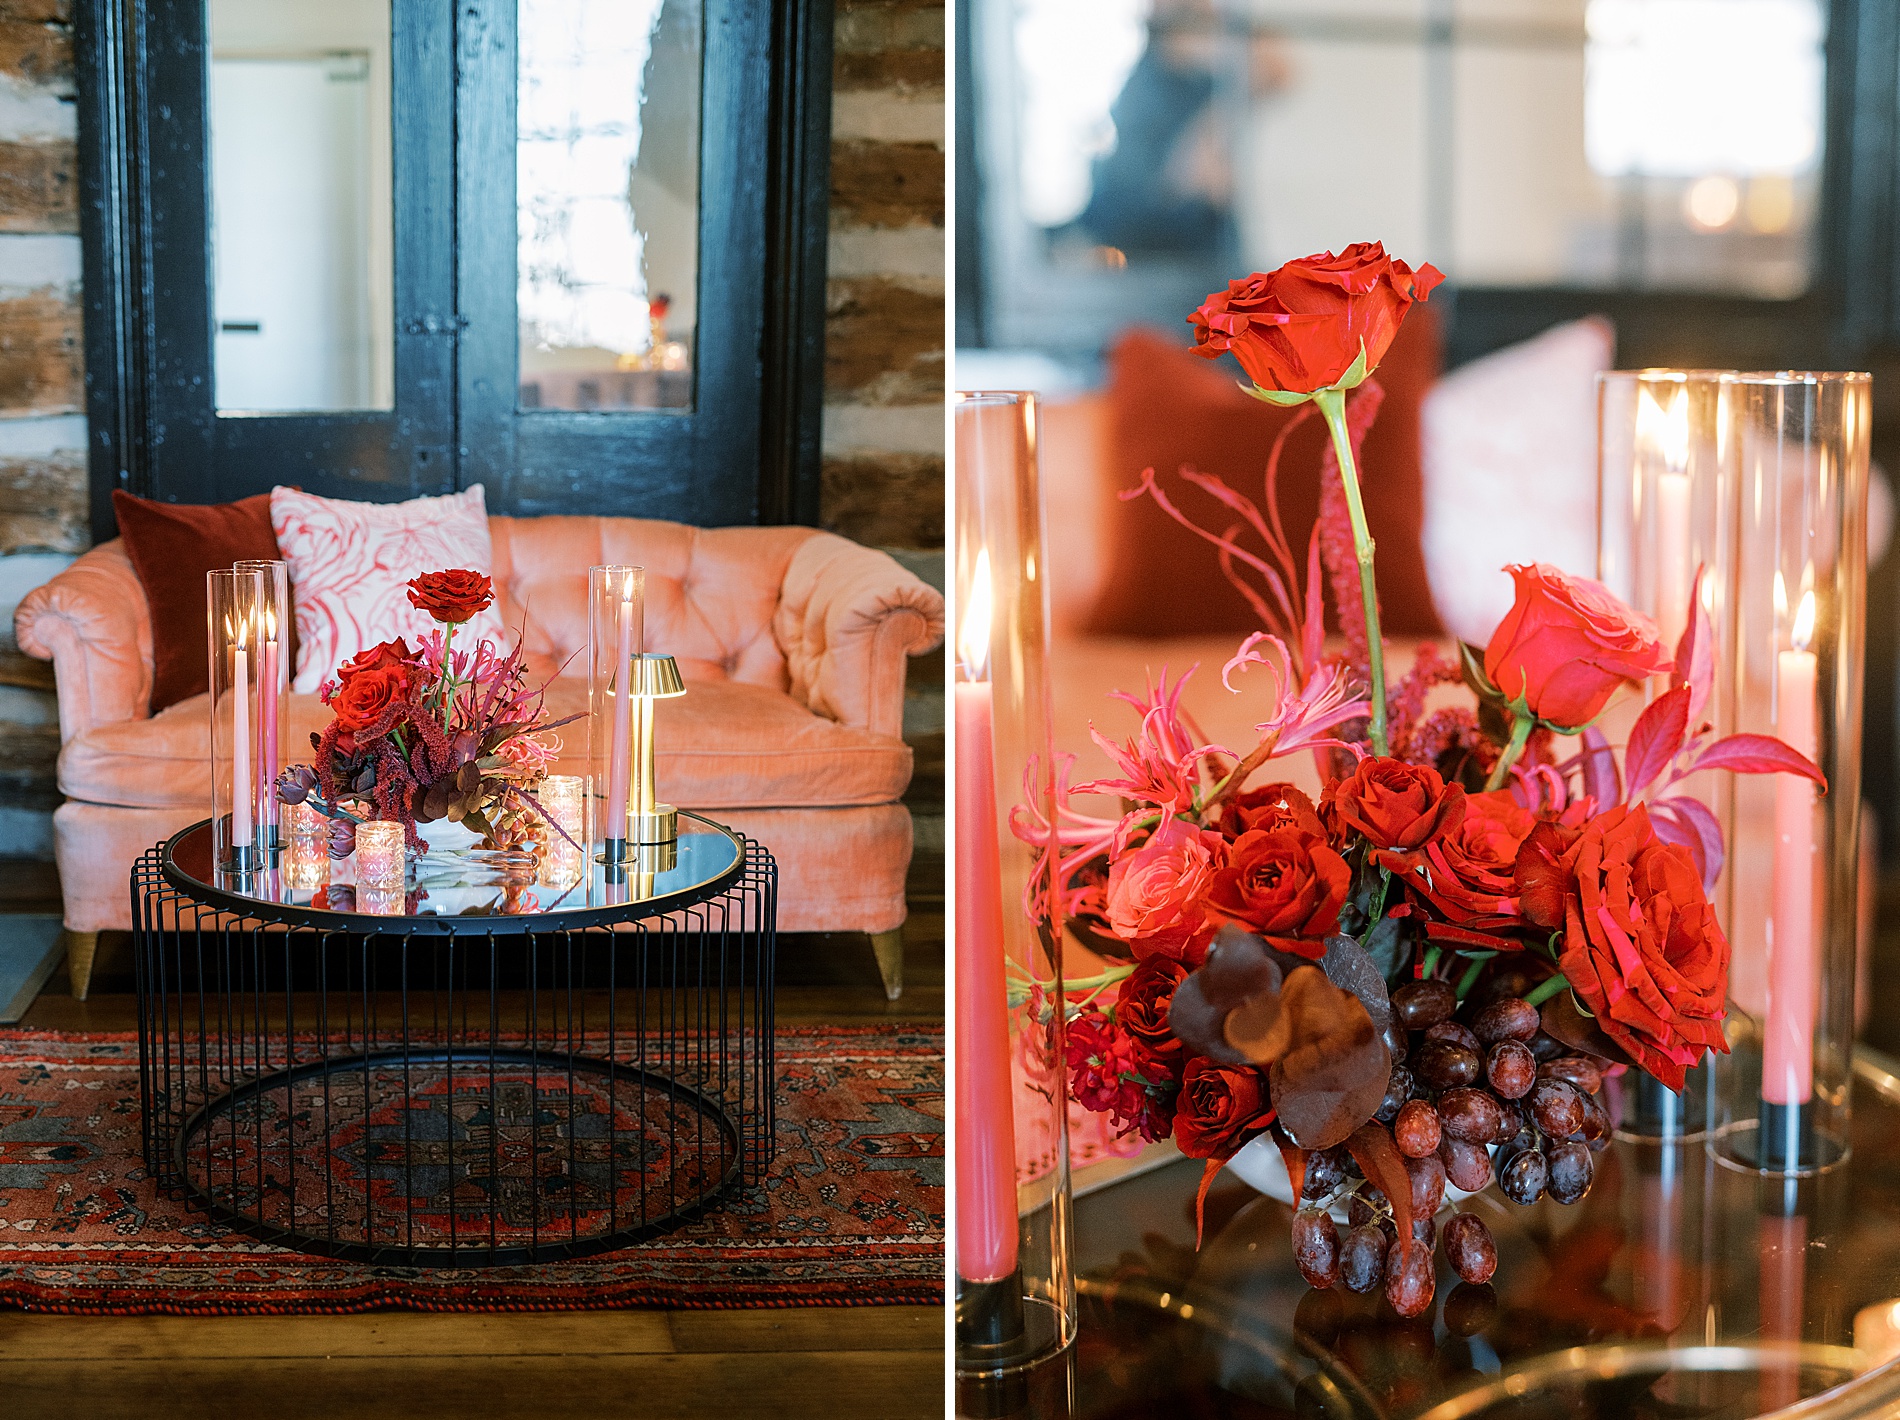 red floral arrangements and candle light create a welcoming space for Nashville Wedding professionals event